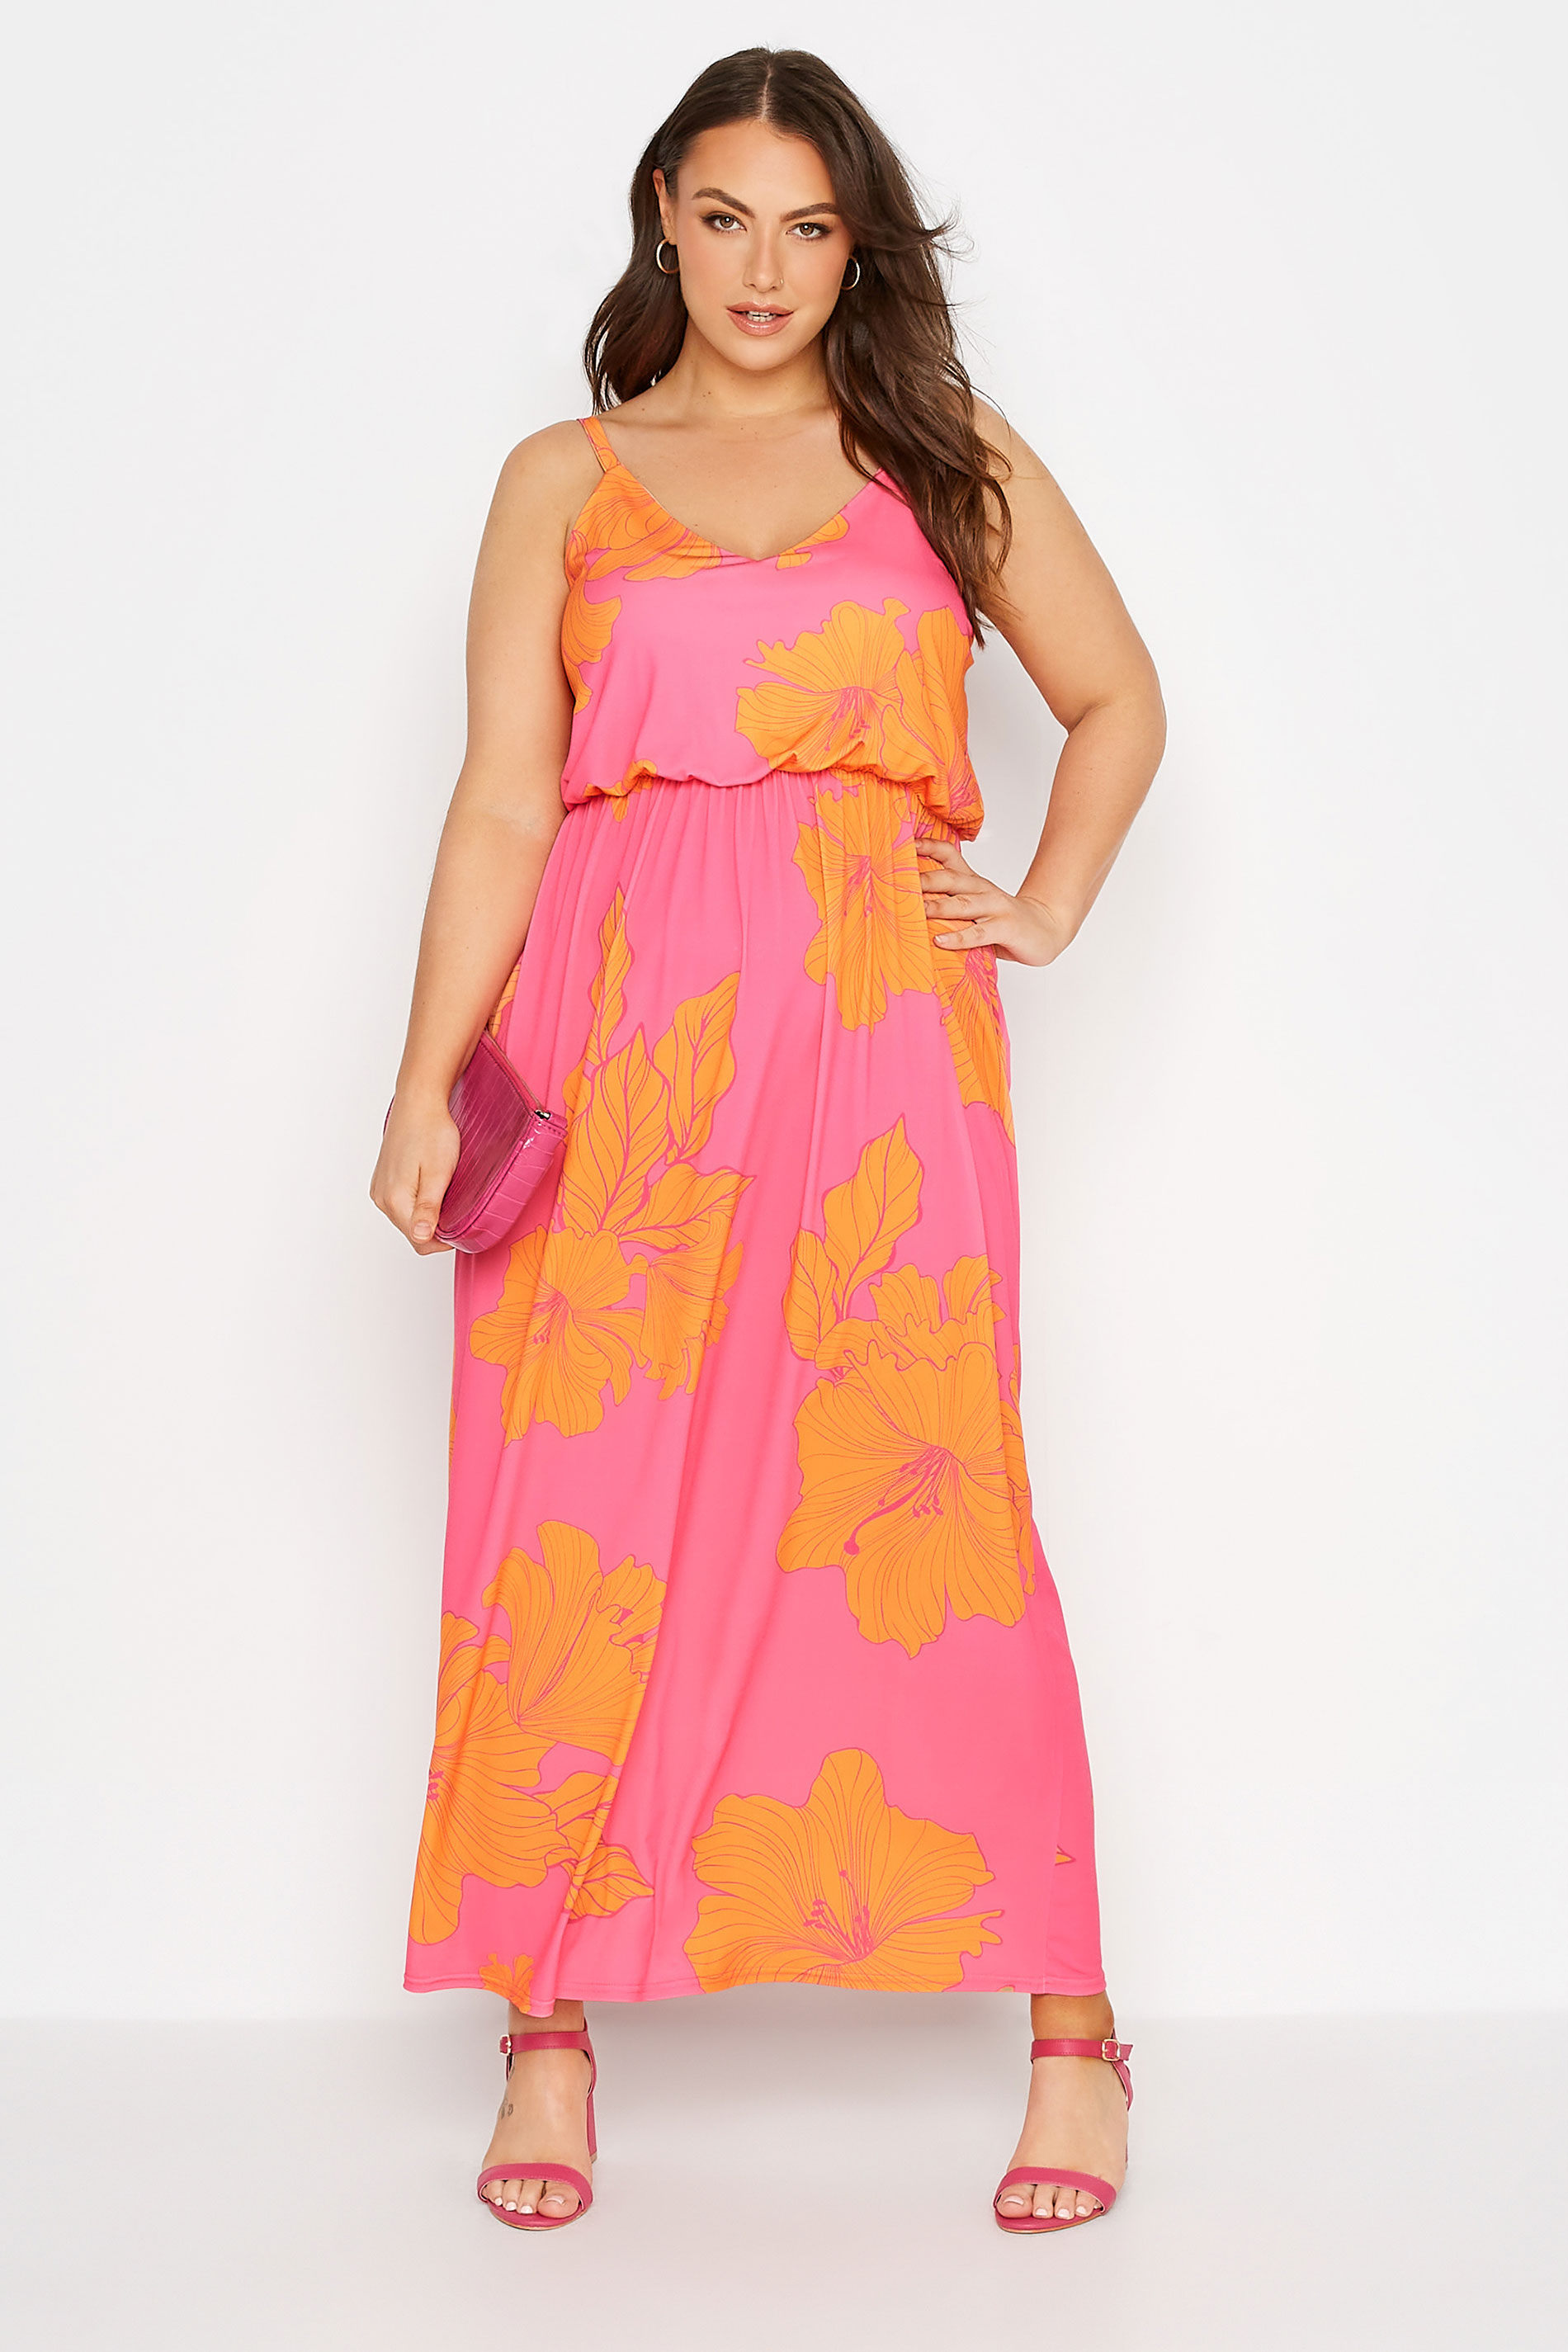 Robes Grande Taille Grande taille  Robes Longues | YOURS LONDON - Robe Rose Imprimé Floral Tropical Orange - XQ17854